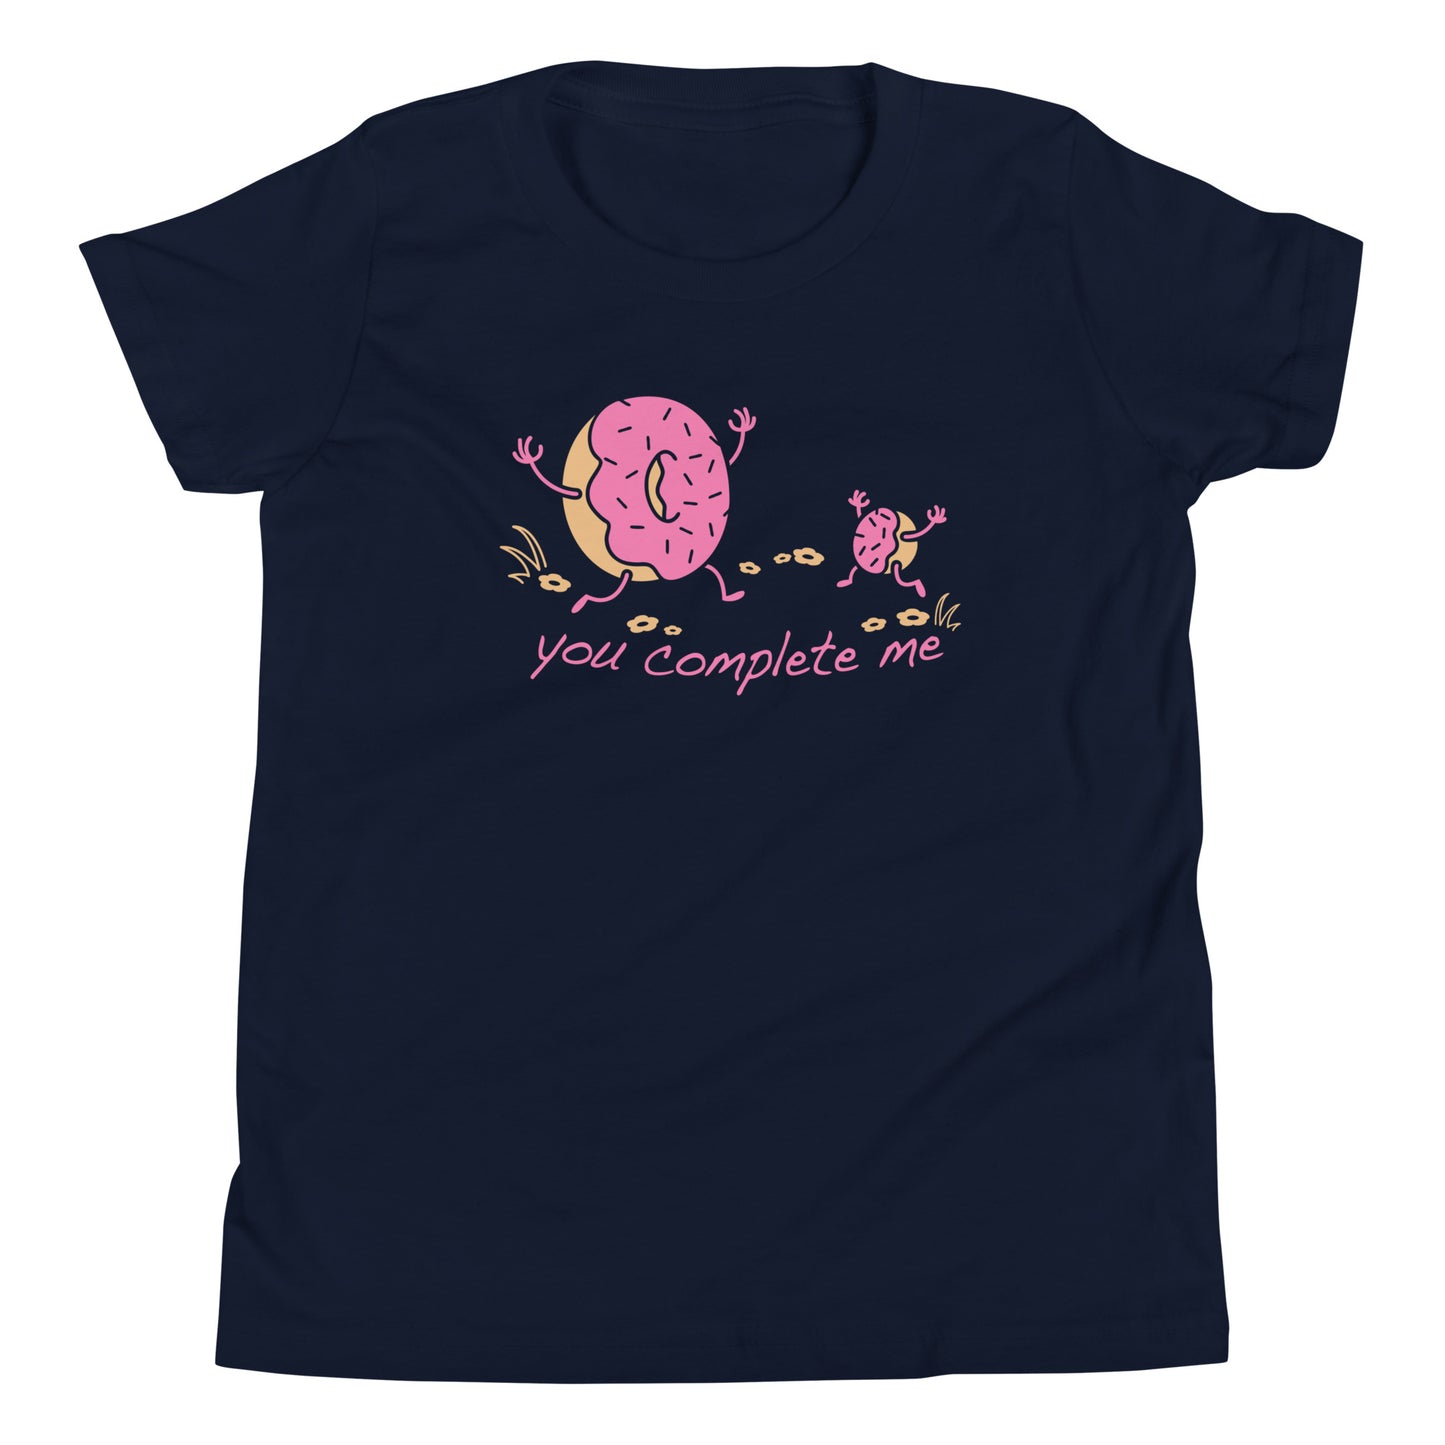 You Complete Me Kid's Youth Tee